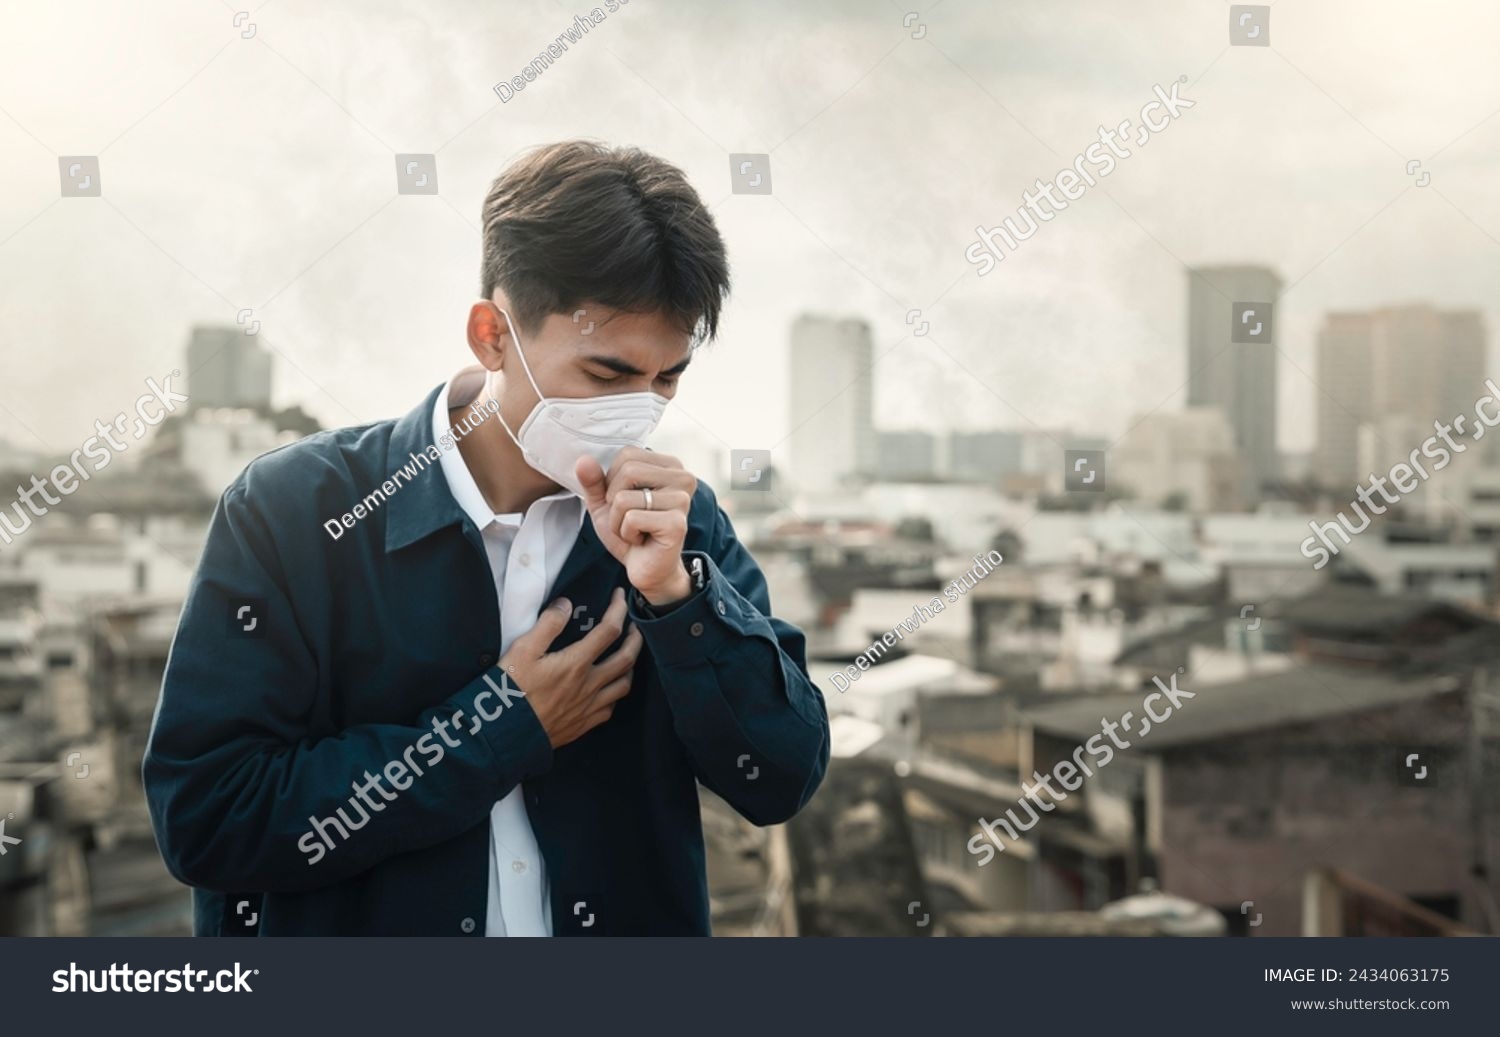 air pollution quality of dust PM 2.5 is toxic and dangerous to health. Business man wearing Protection mask unhealthy air pollution dust smoke in an urban city and smog with bad weather #2434063175